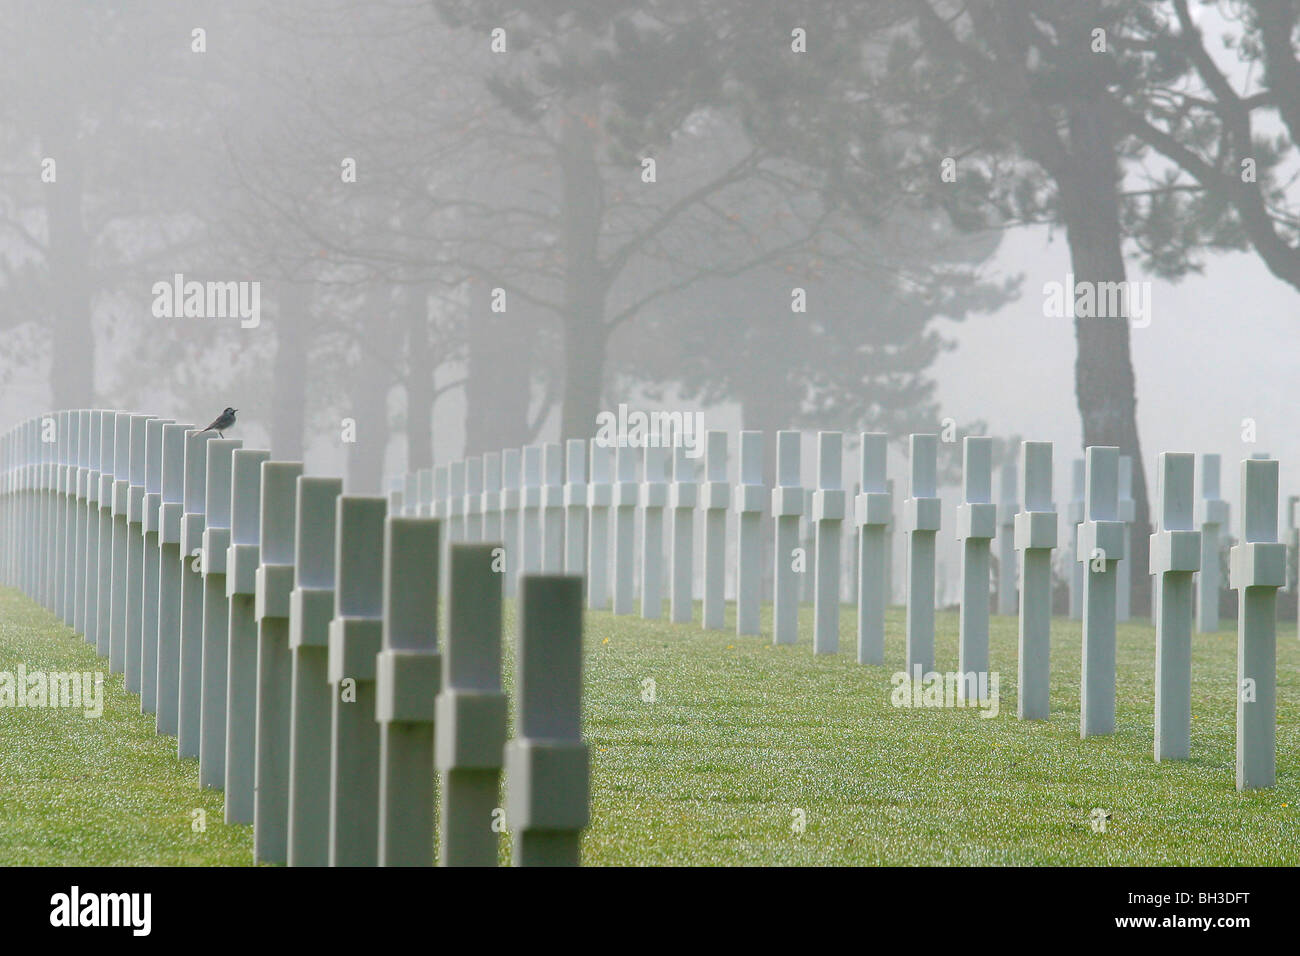 9387 AMERICAN SOLDIERS REST IN PEACE IN THE MILITARY CEMETERY OF COLLEVILLE-SUR-MER, D-DAY LANDING SITE, CALVADOS (14) Stock Photo